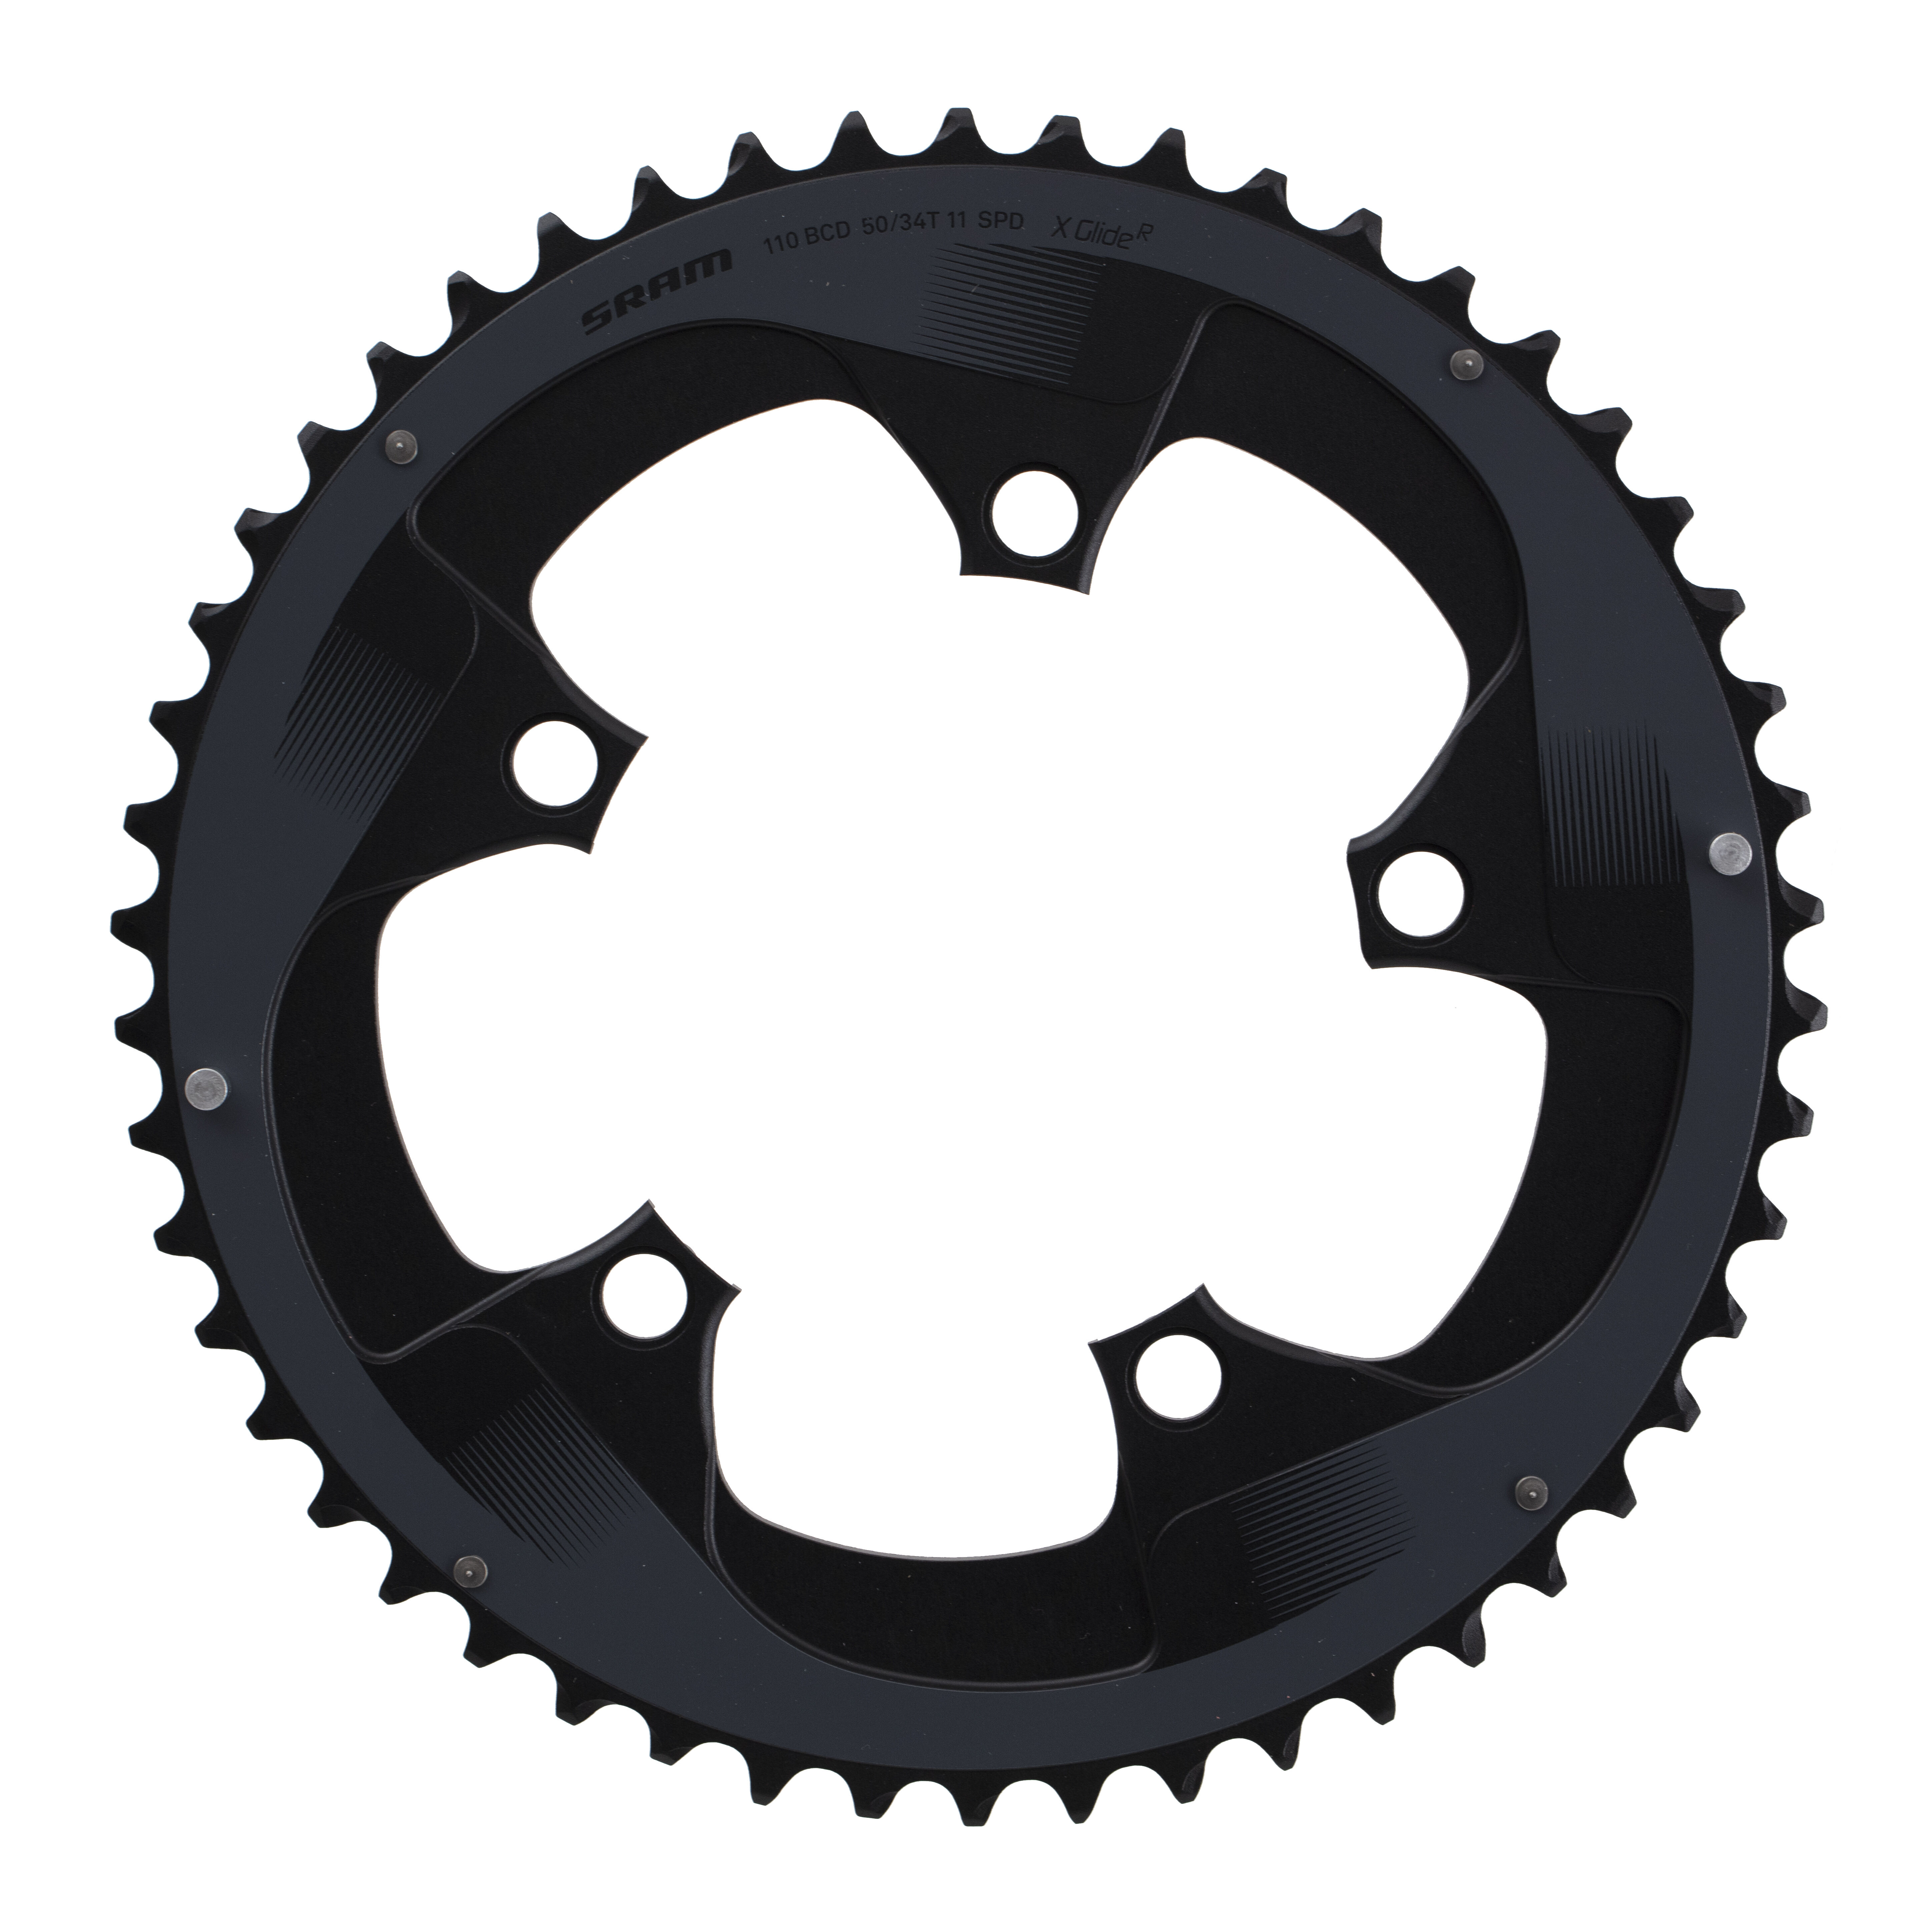 Force 22 chainring online store